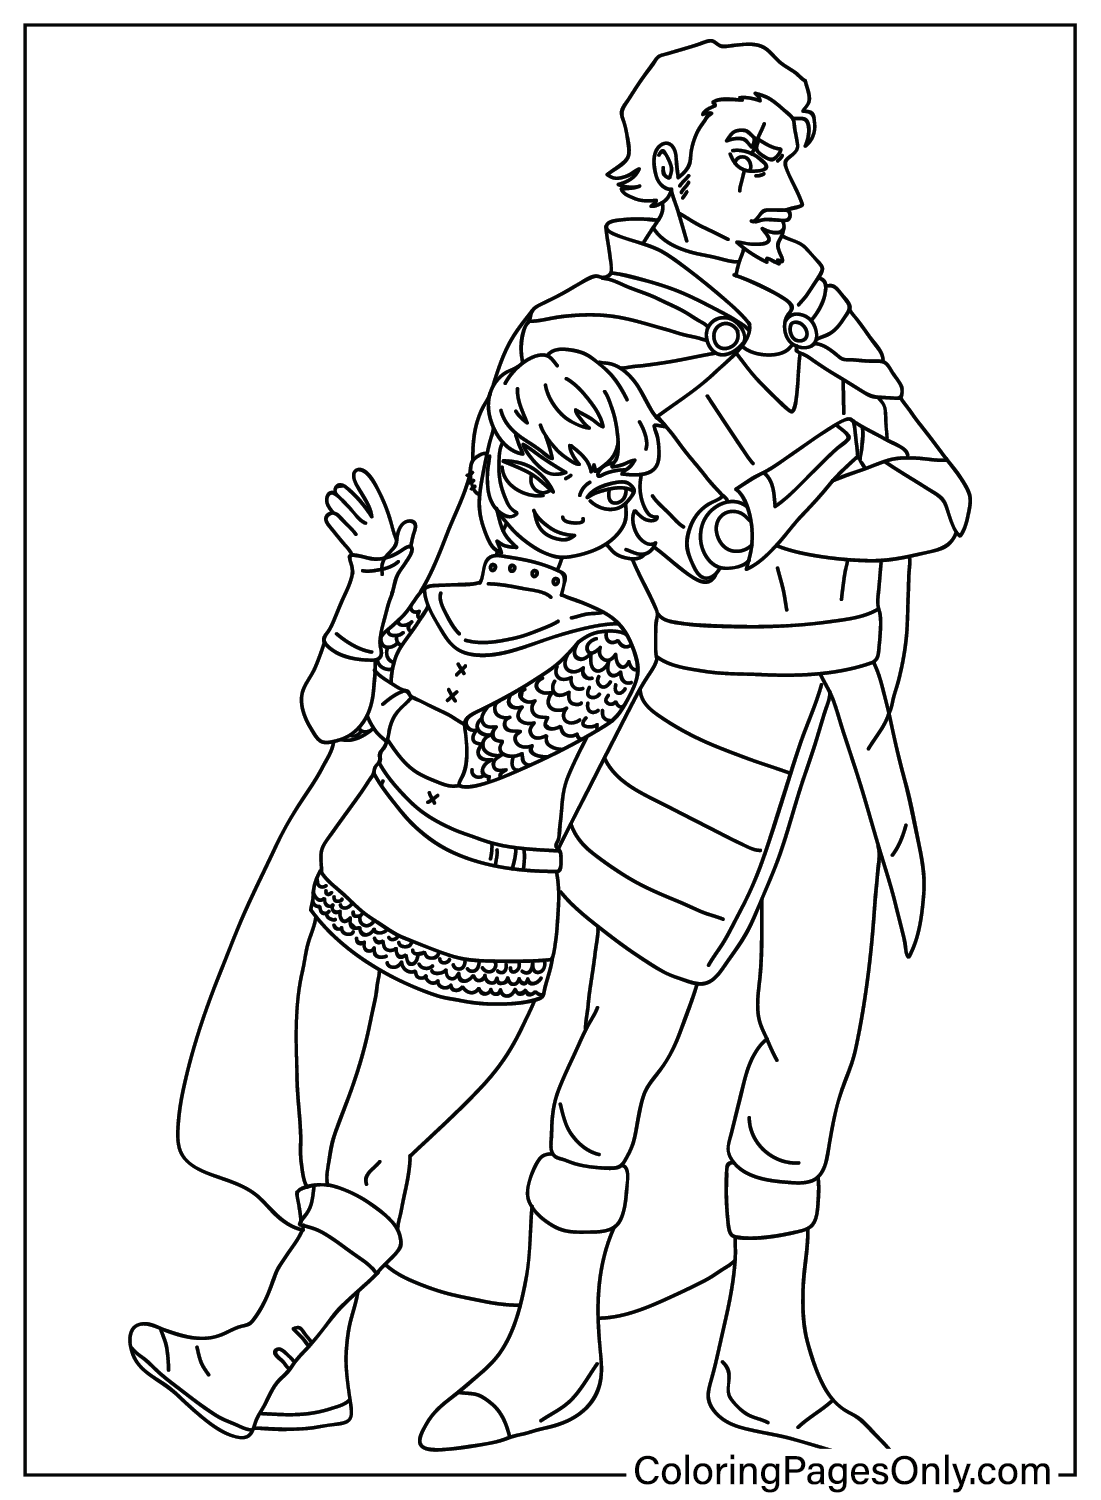 Nimona Coloring Pages for Kids from Nimona